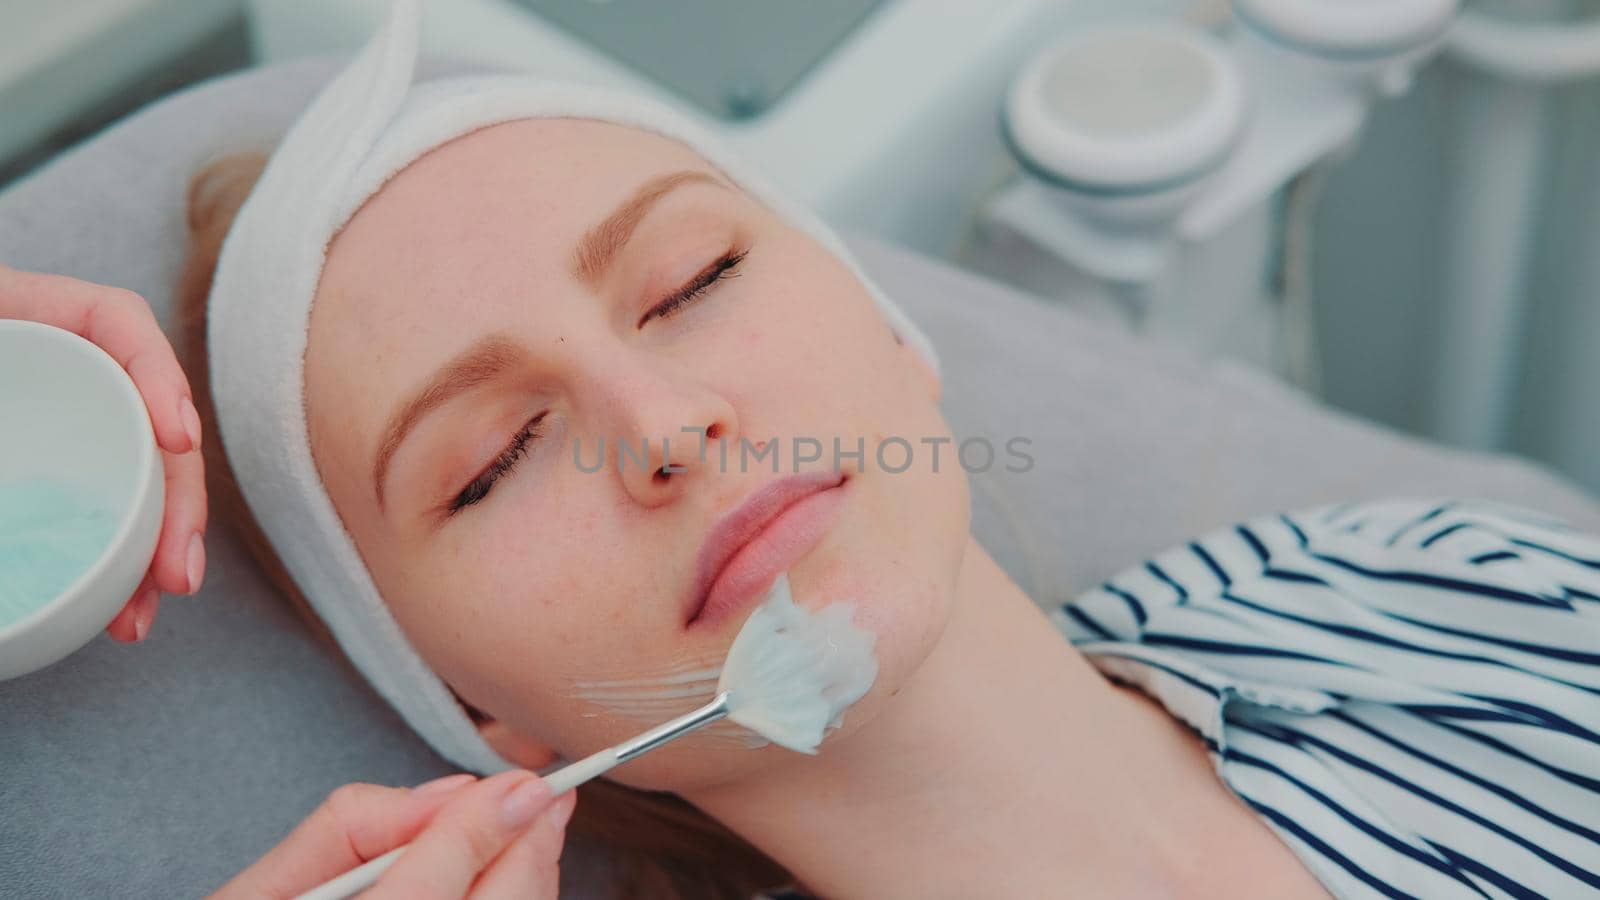 Cosmetician hands applying cream mask on young woman's face at beauty spa salon by art24pro